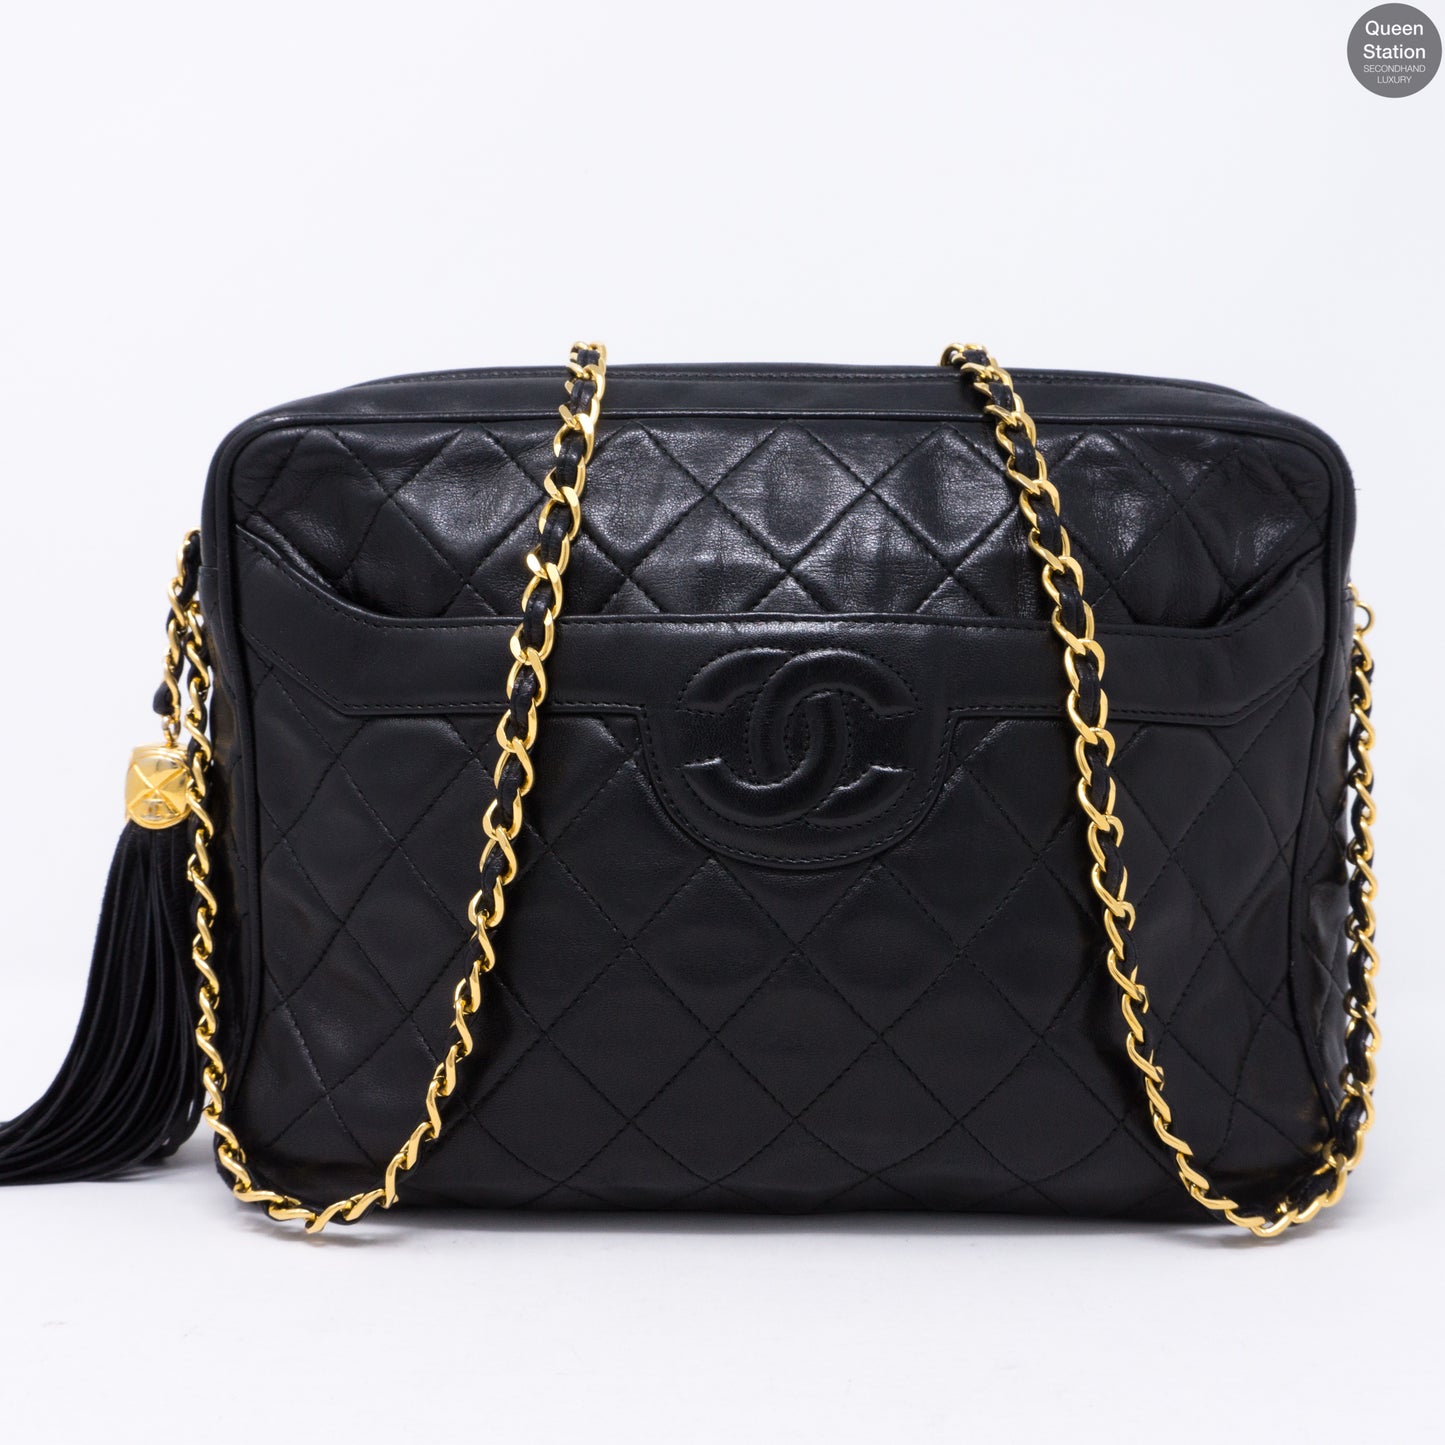 CHANEL, Bags, Chanel Vintage Diamond Cc Camera Bag Diagonal Quilted  Leather Medium Black